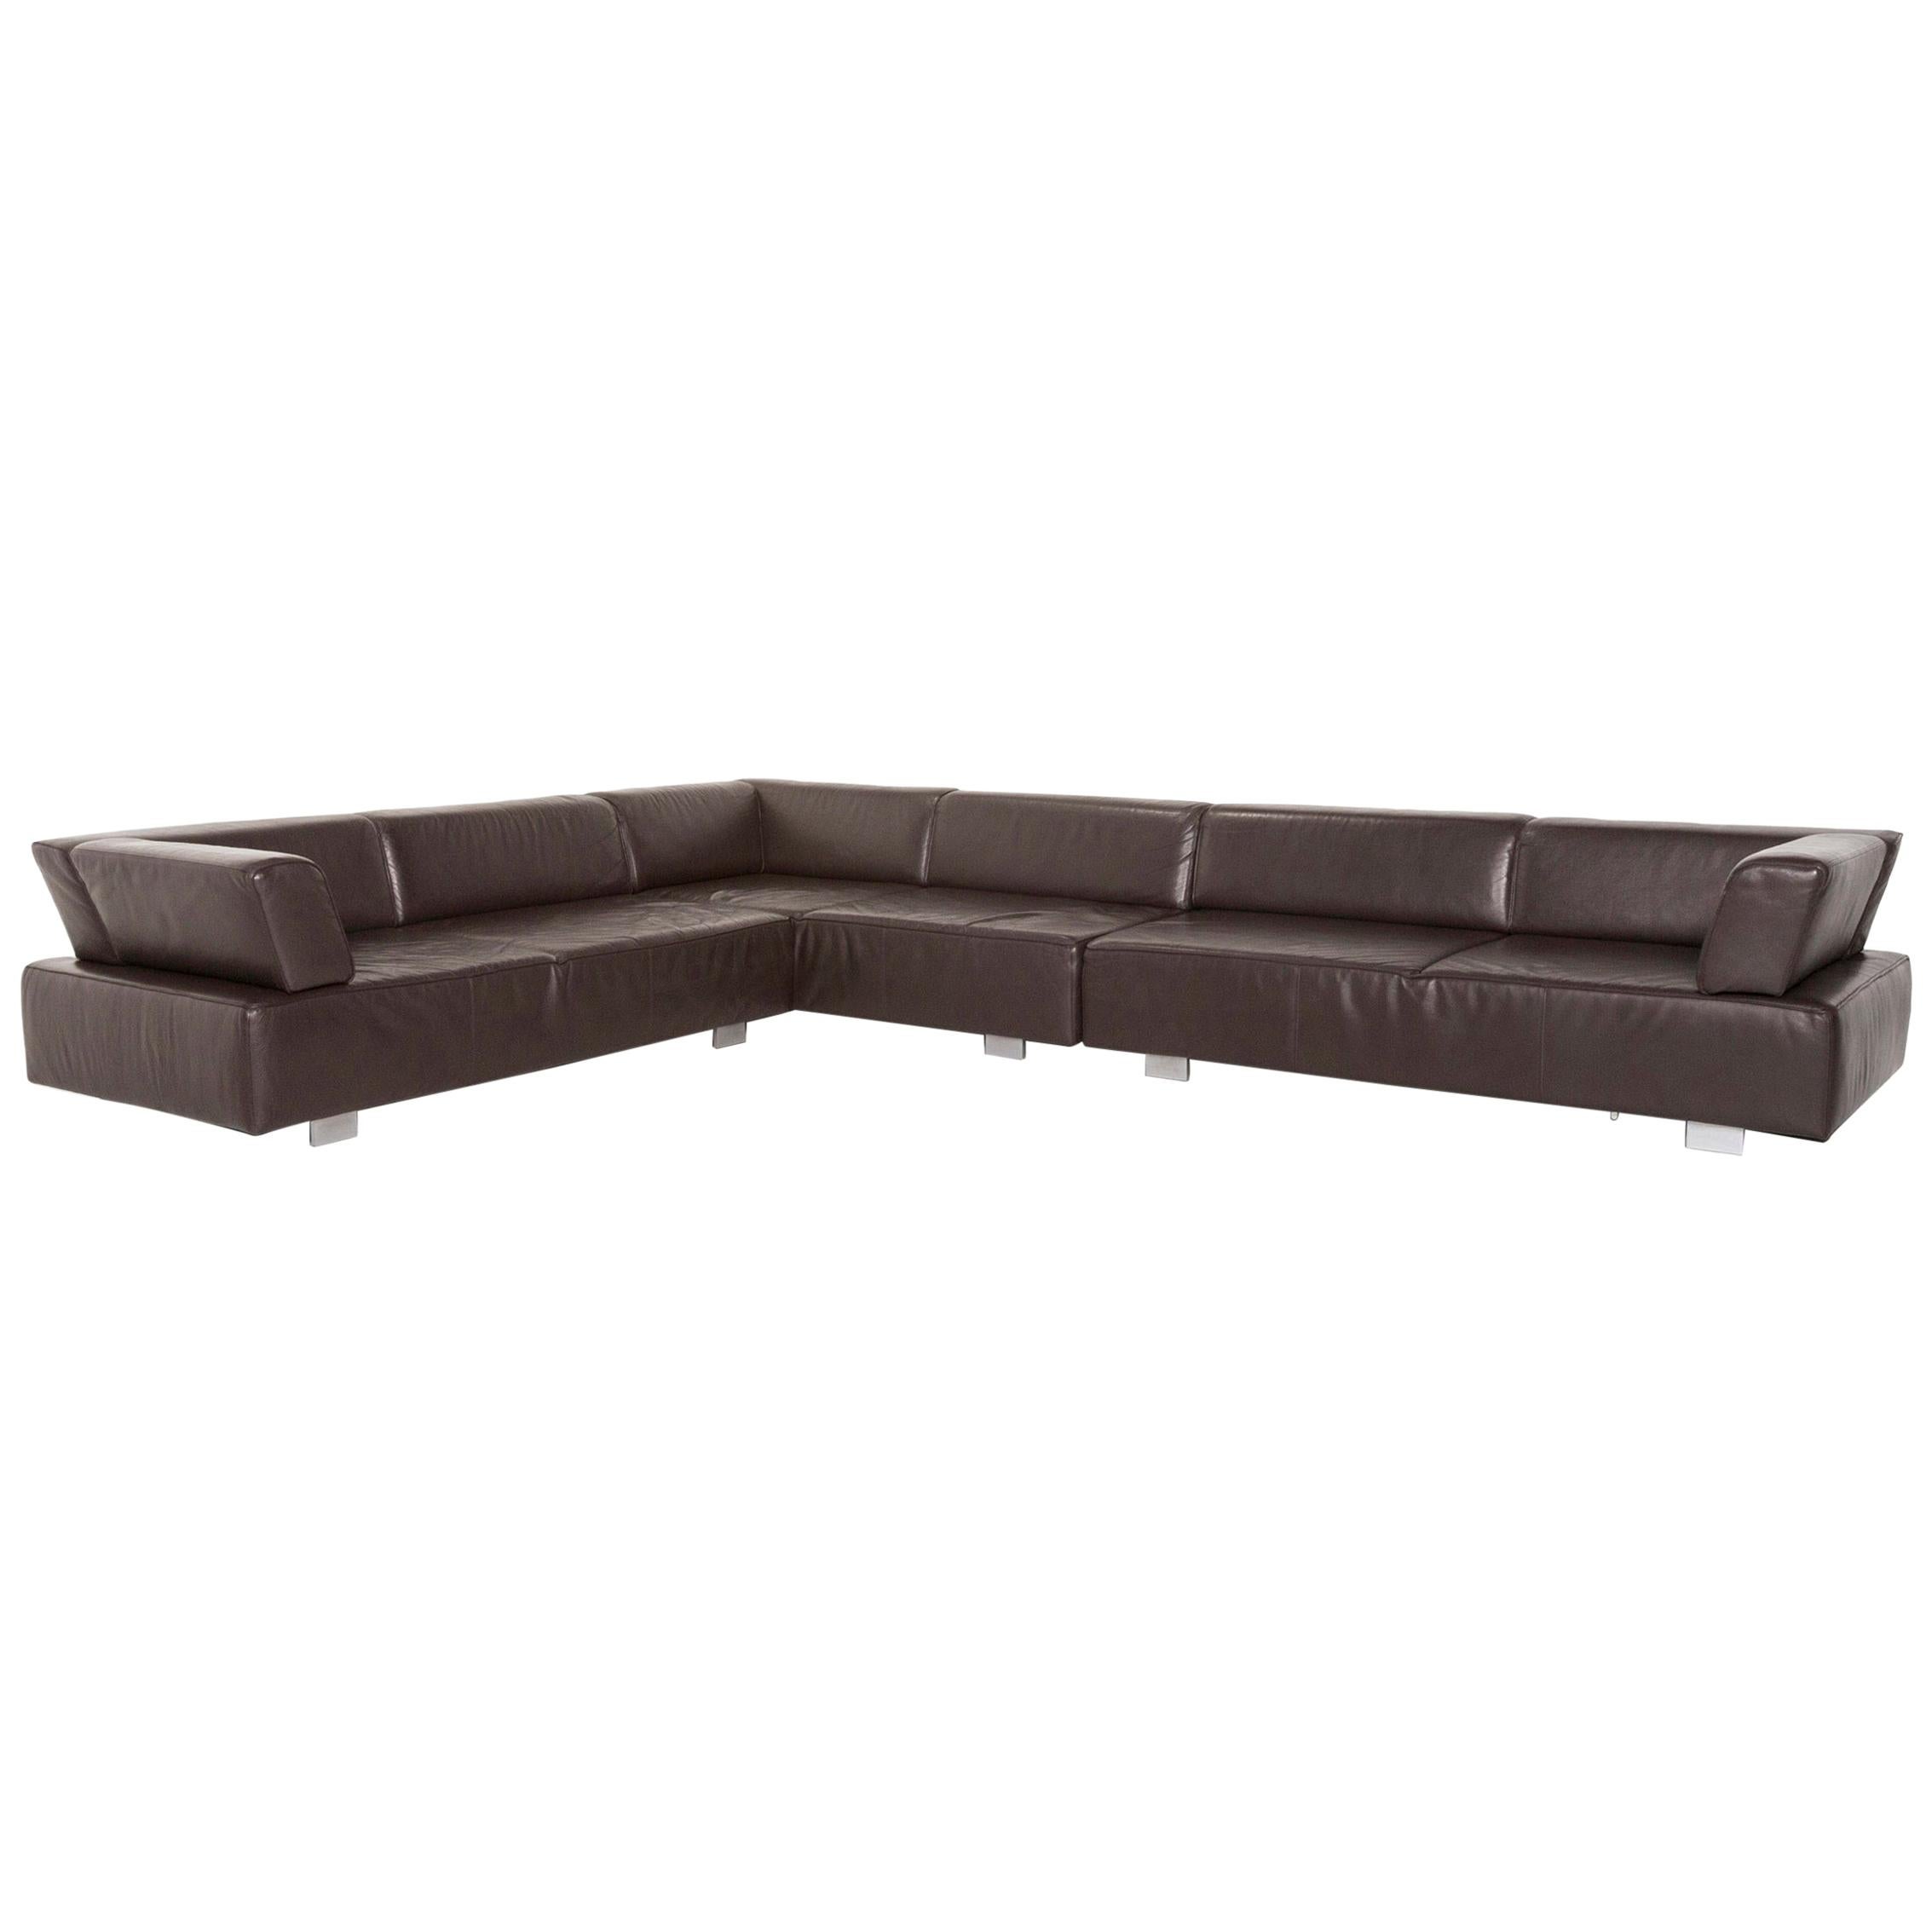 Brühl & Sippold Leather Corner Sofa Brown Dark Brown Sofa Couch For Sale